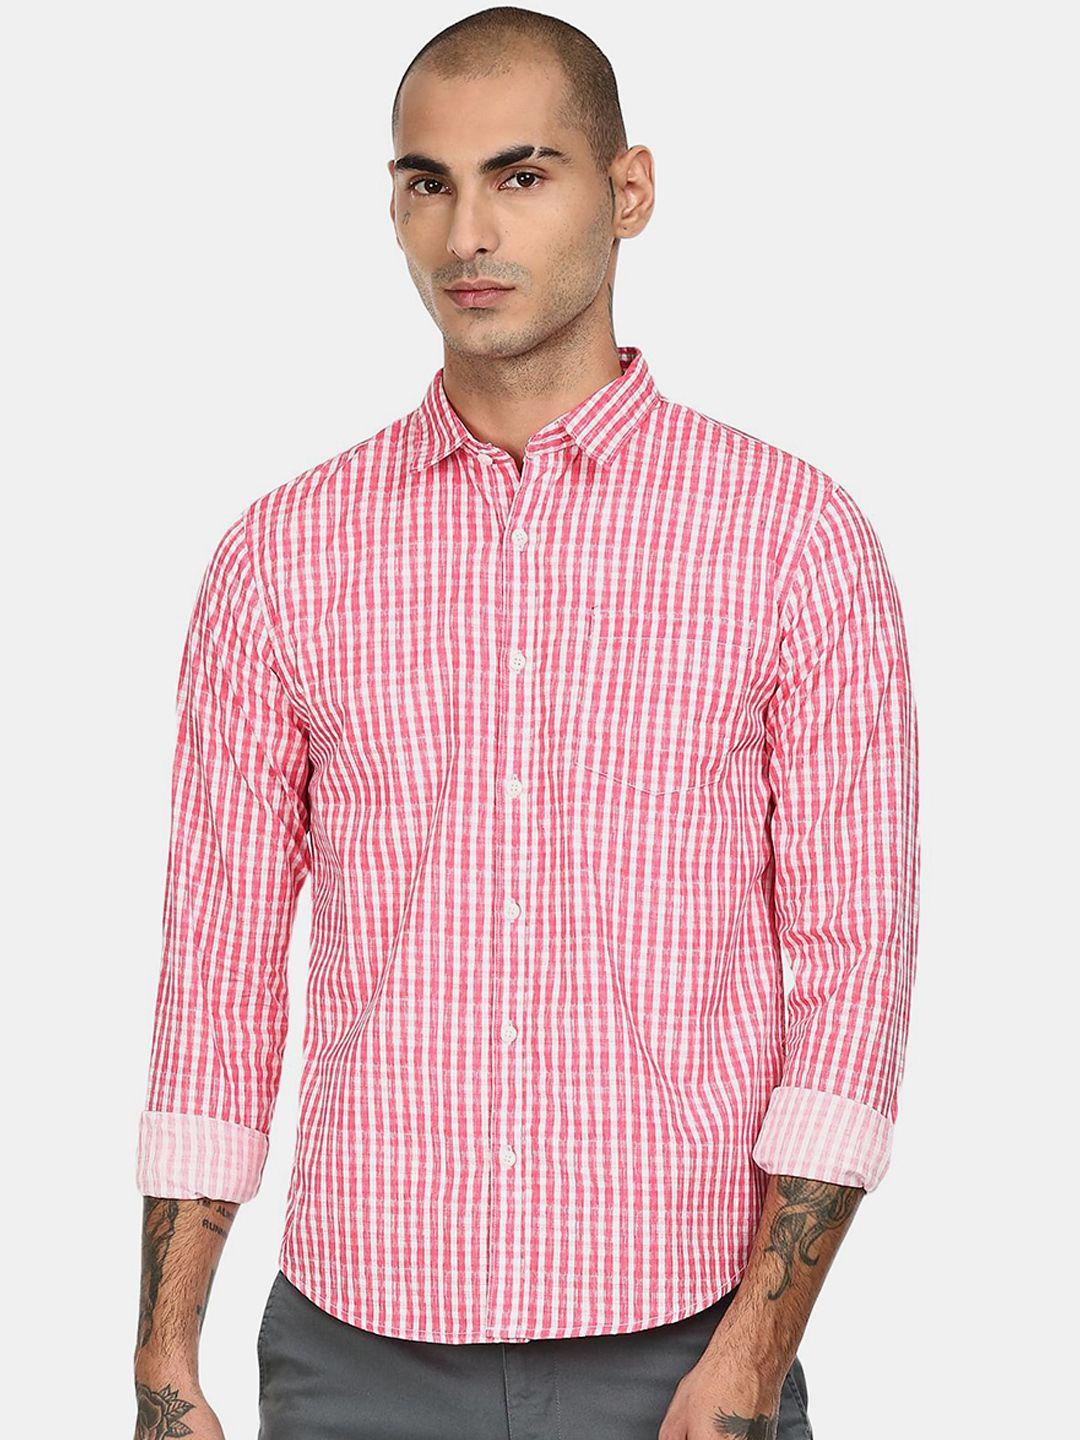 ruggers men red & white striped cotton casual shirt